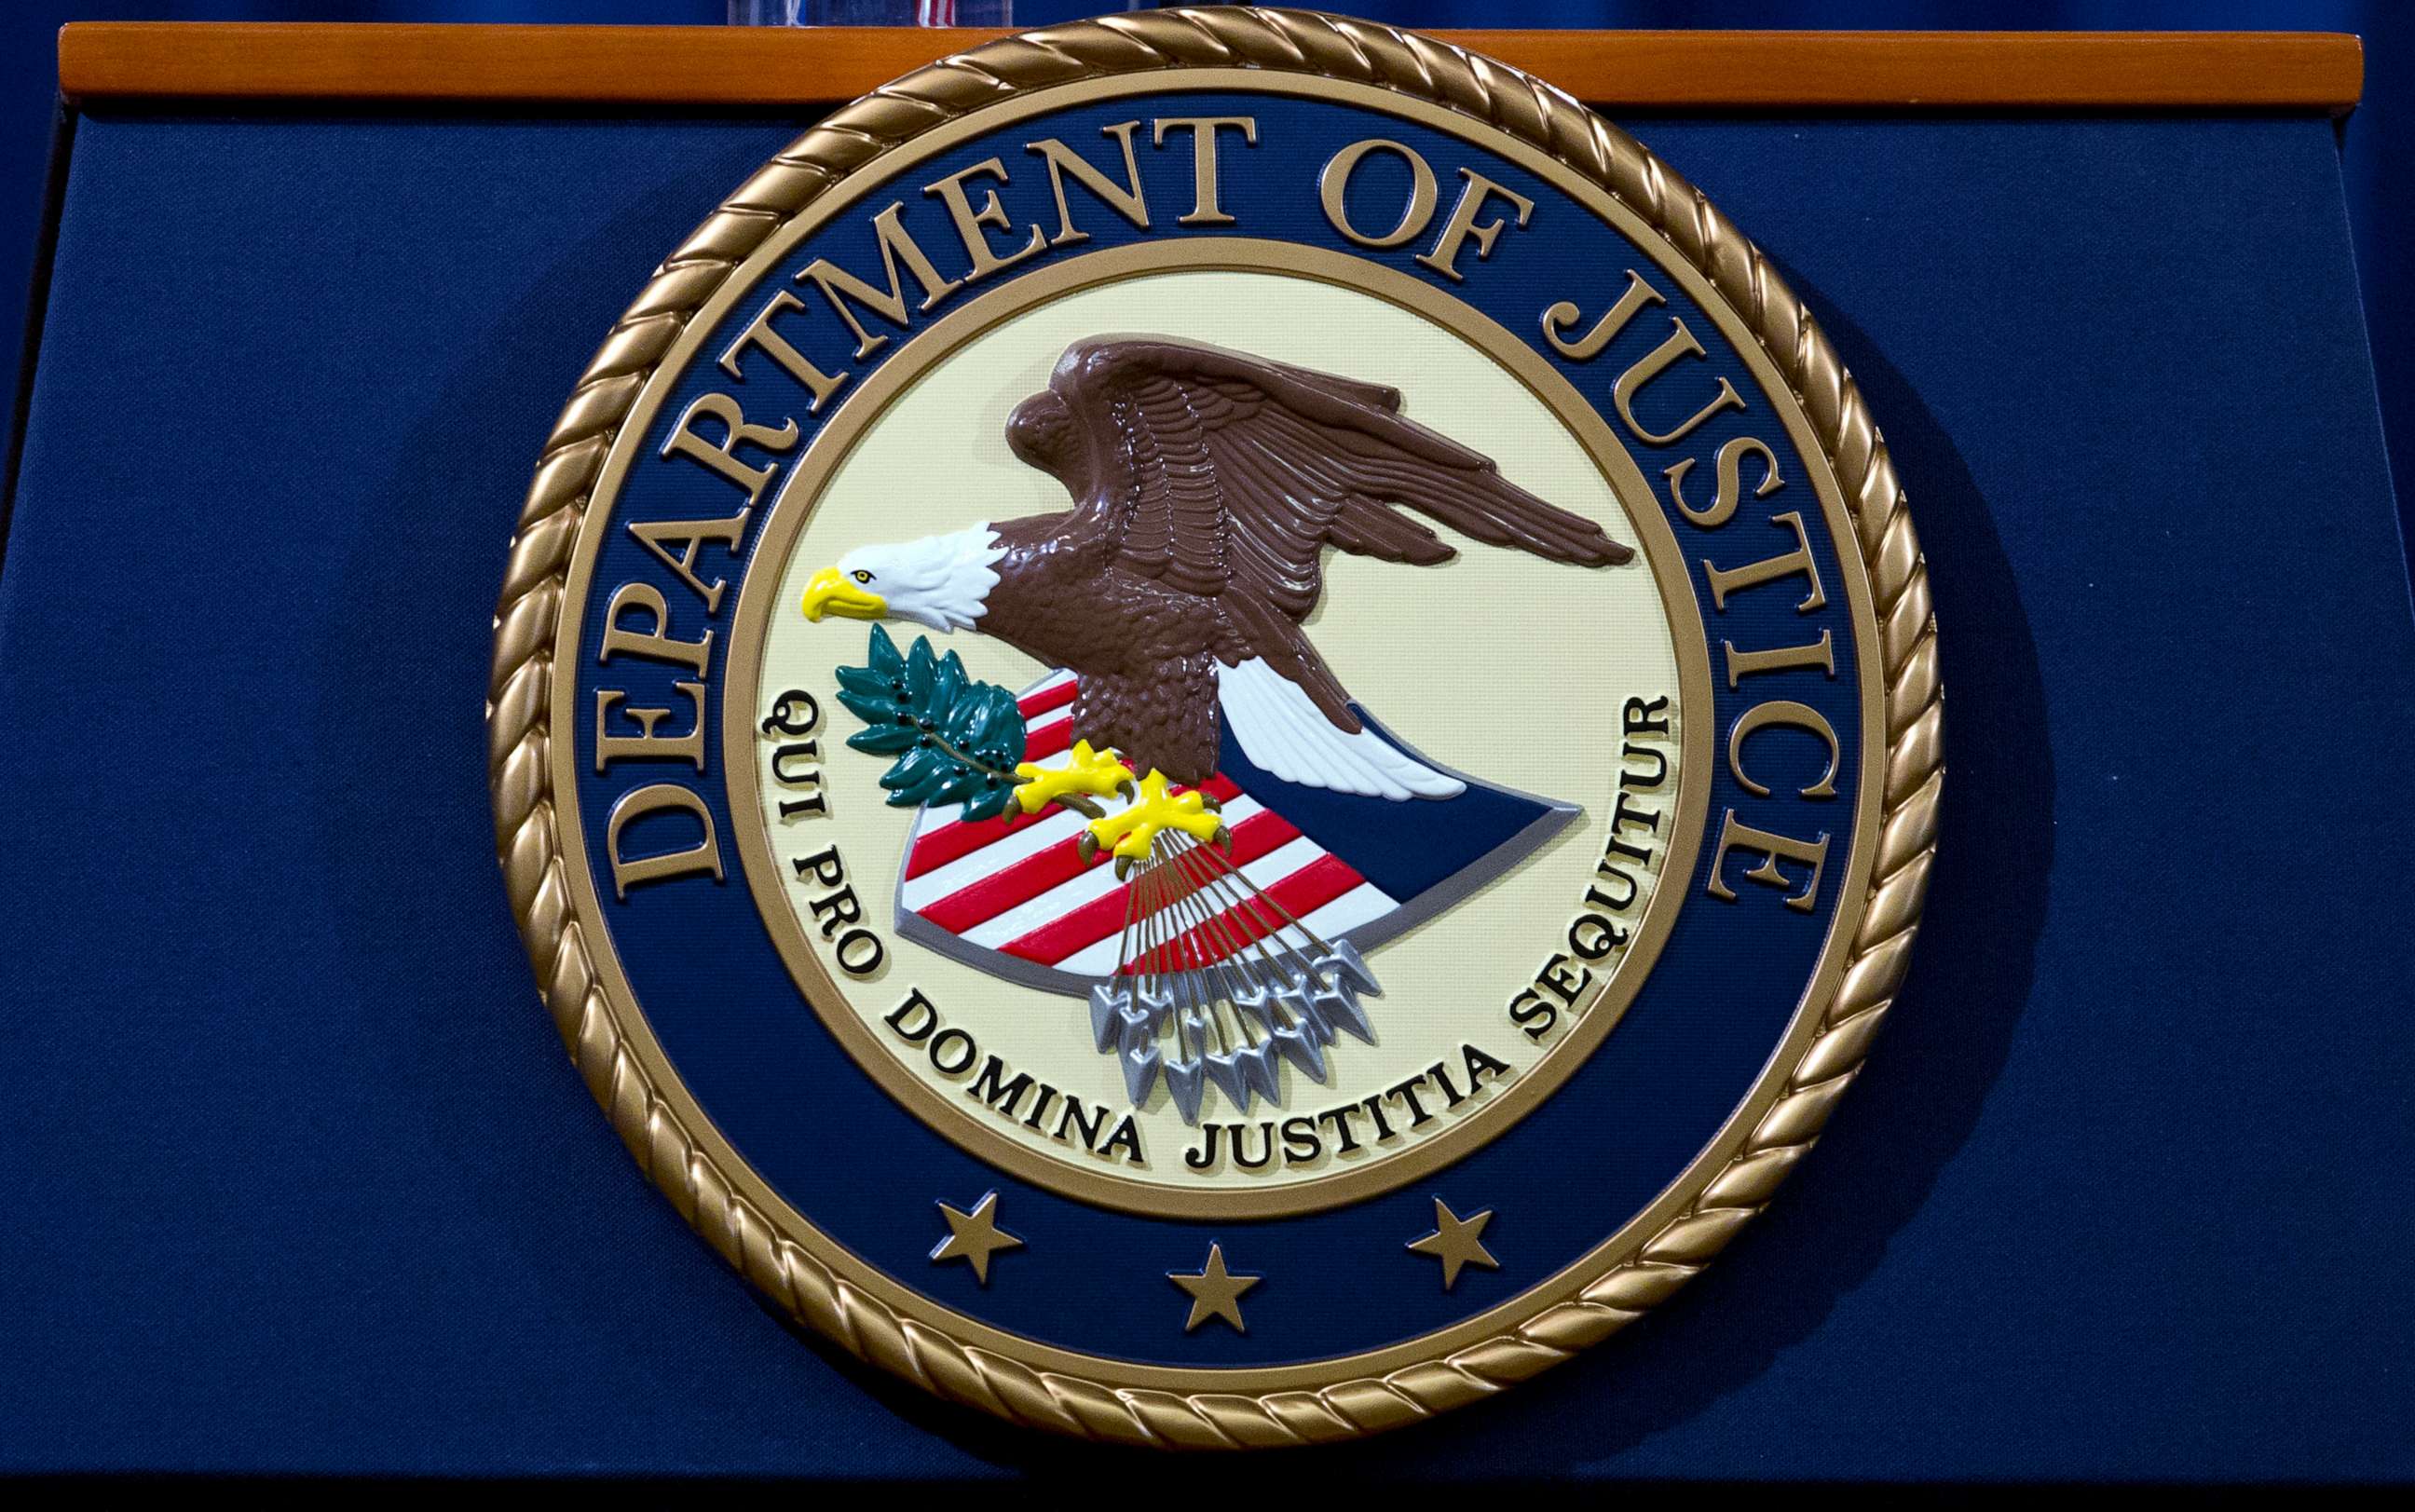 PHOTO: In this Nov. 28, 2018, file photo, the Department of Justice seal is shown in Washington, D.C.